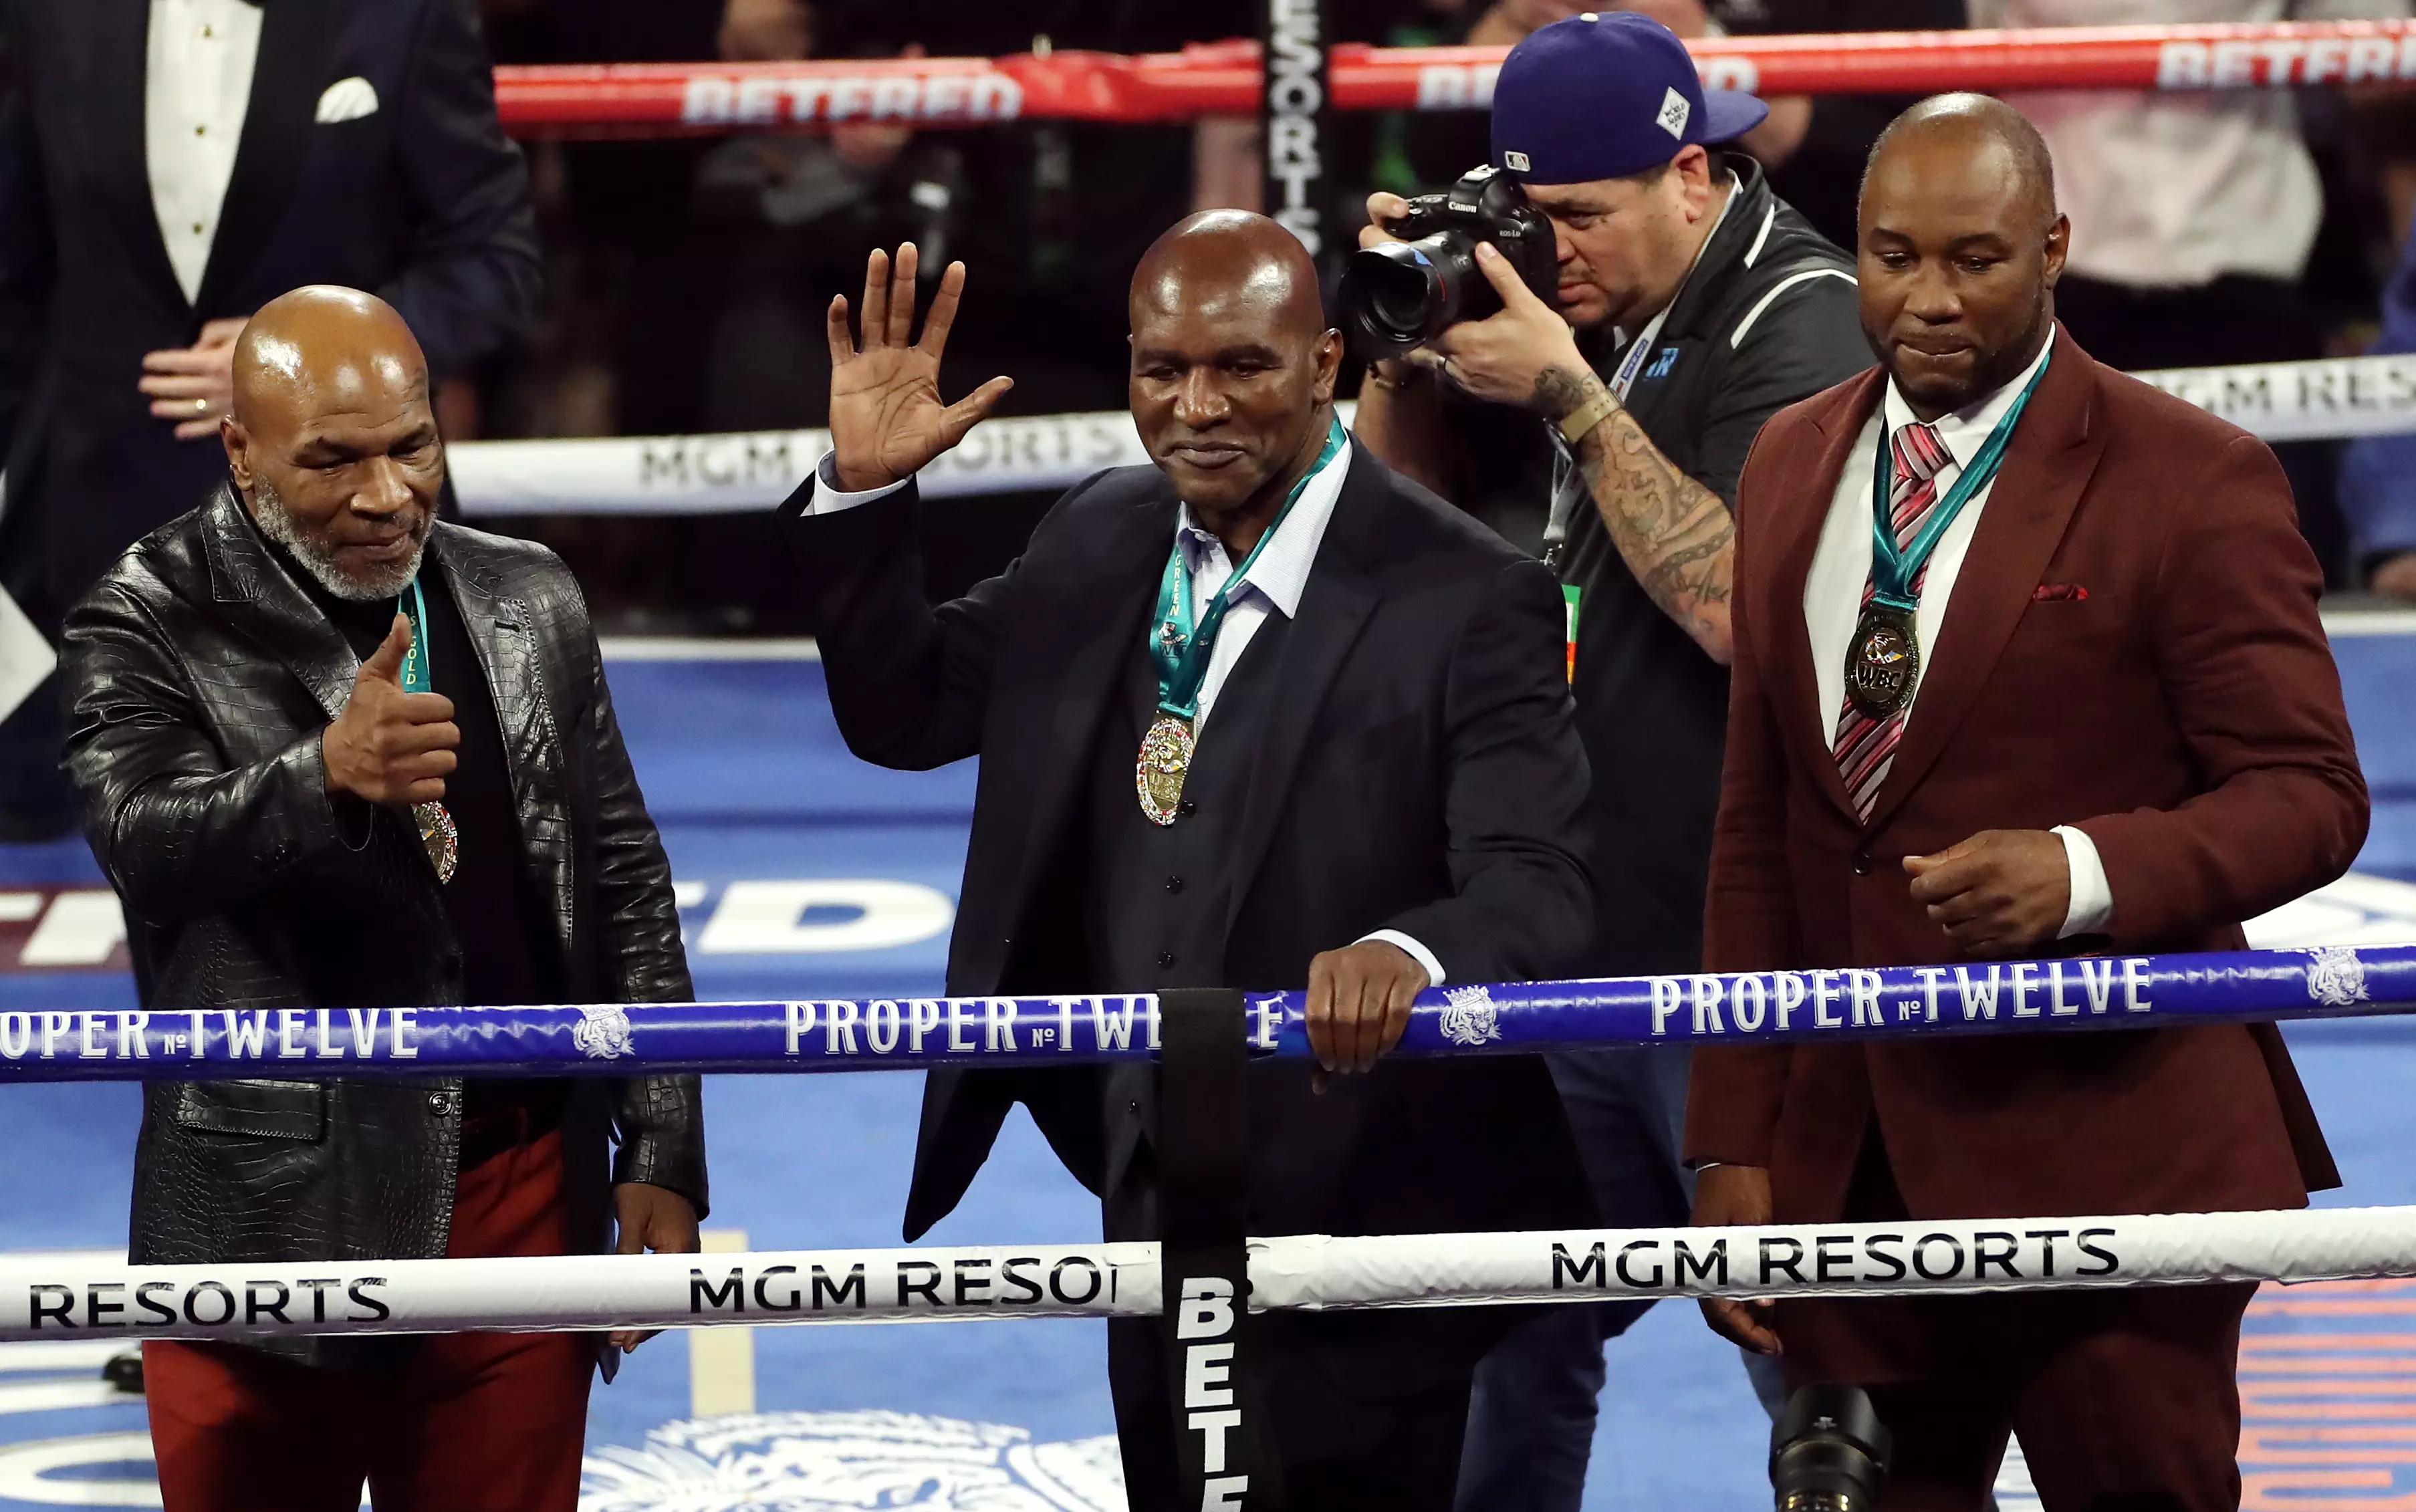 Lewis, Tyson and Holyfield in the ring together earlier this year. Image: PA Images